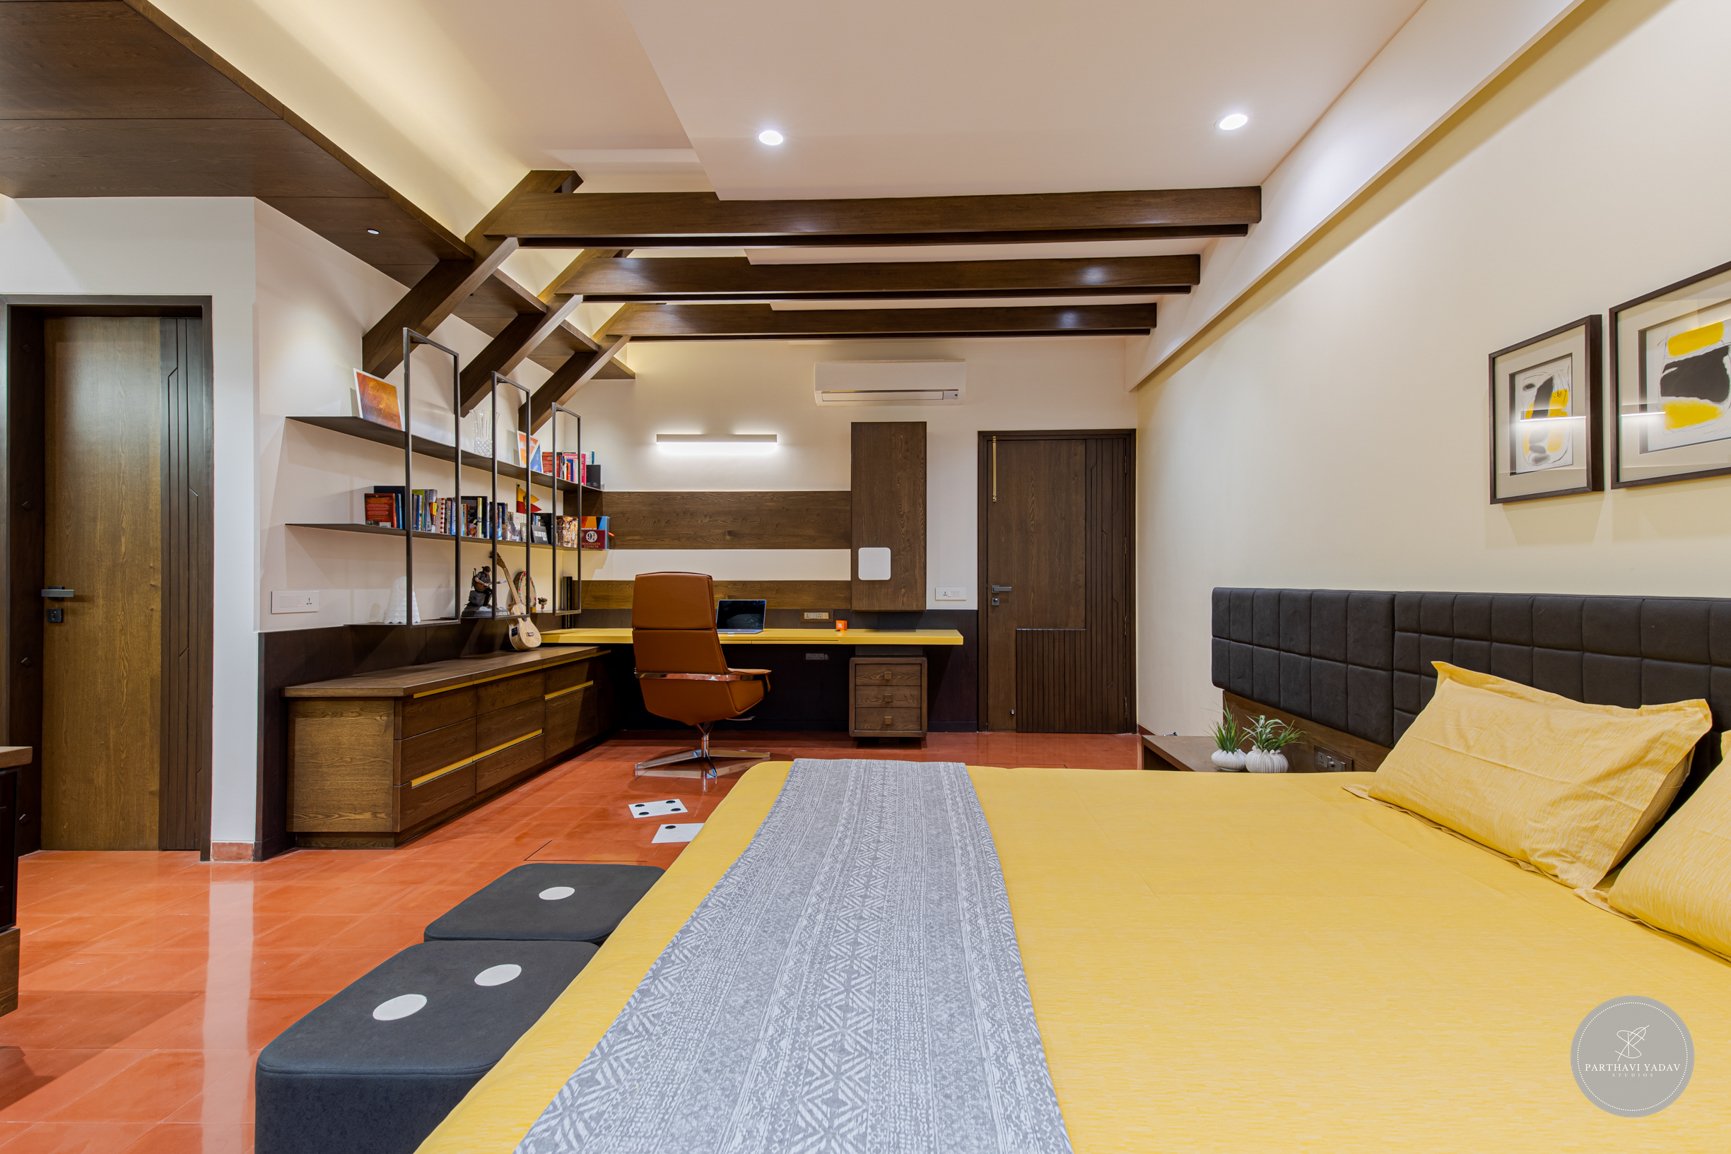 best interior photographer in pune bangalore - daughter's room with wooden panel ceiling and checkered tiles and a study table and guitar.jpg